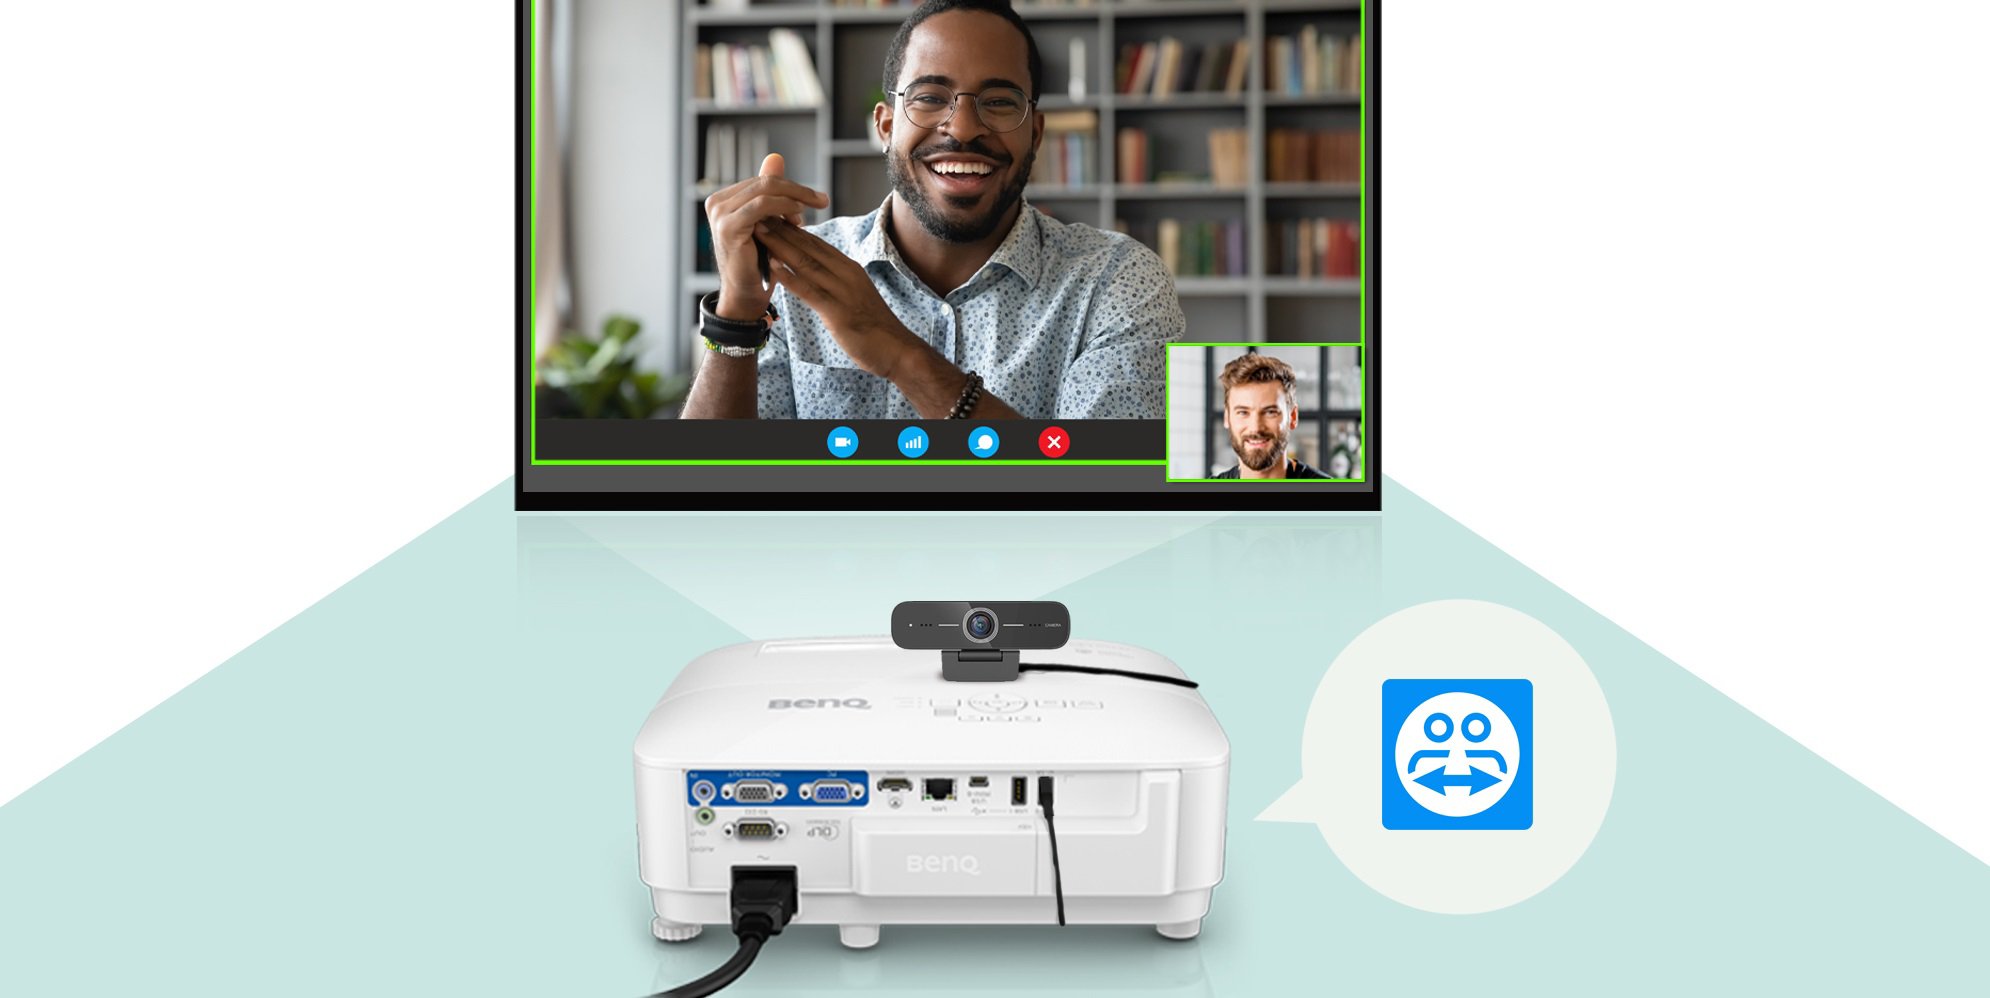 It's easy to start a video conference with BenQ Smart Projector for Business EW800st and DVY21  webcam. 